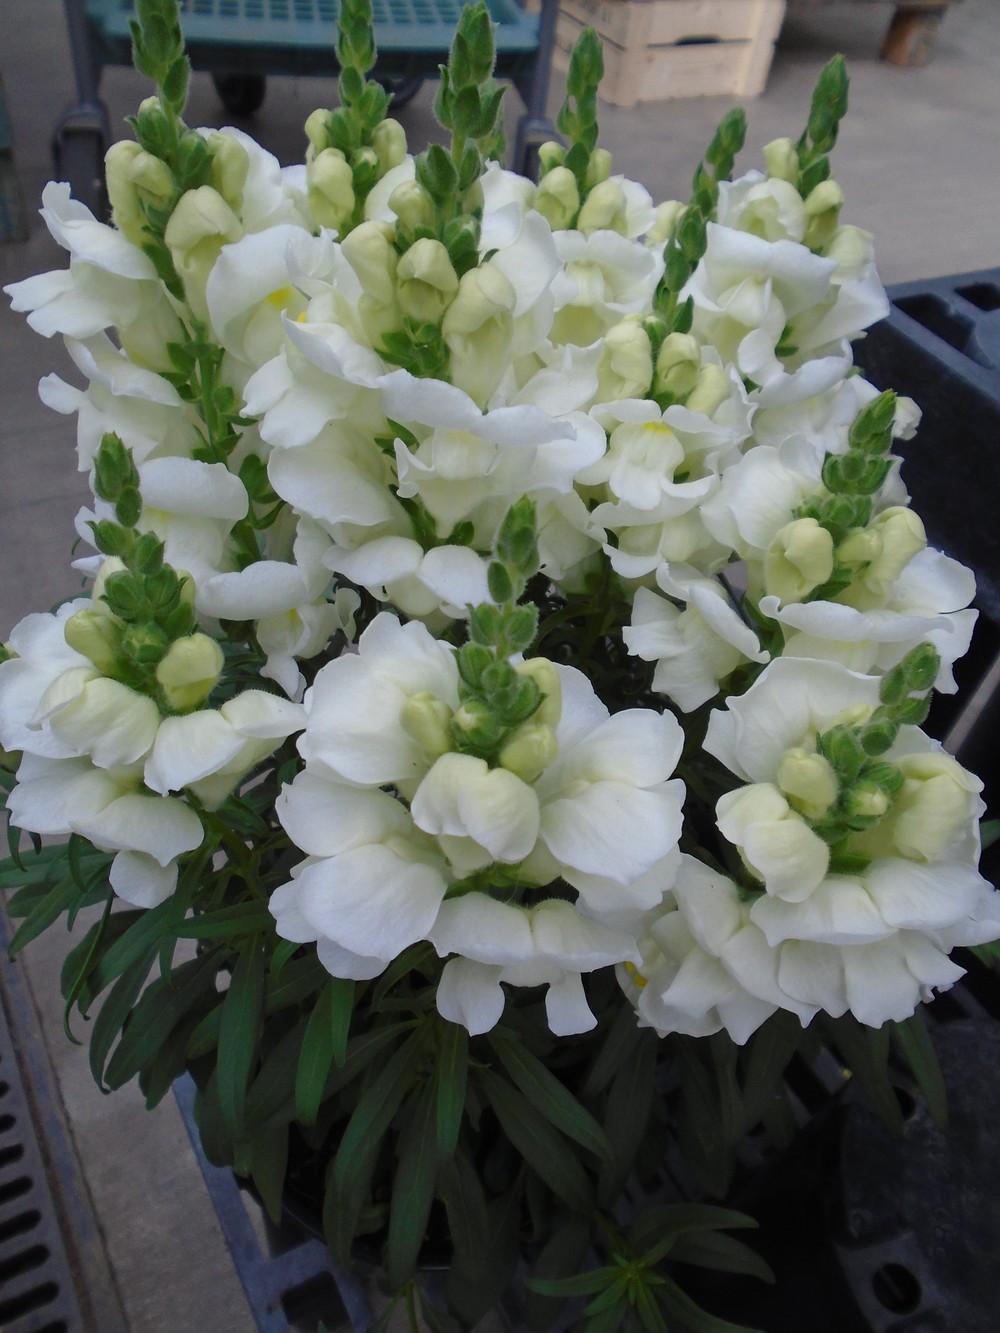 Photo of Snapdragon (Antirrhinum) uploaded by Paul2032